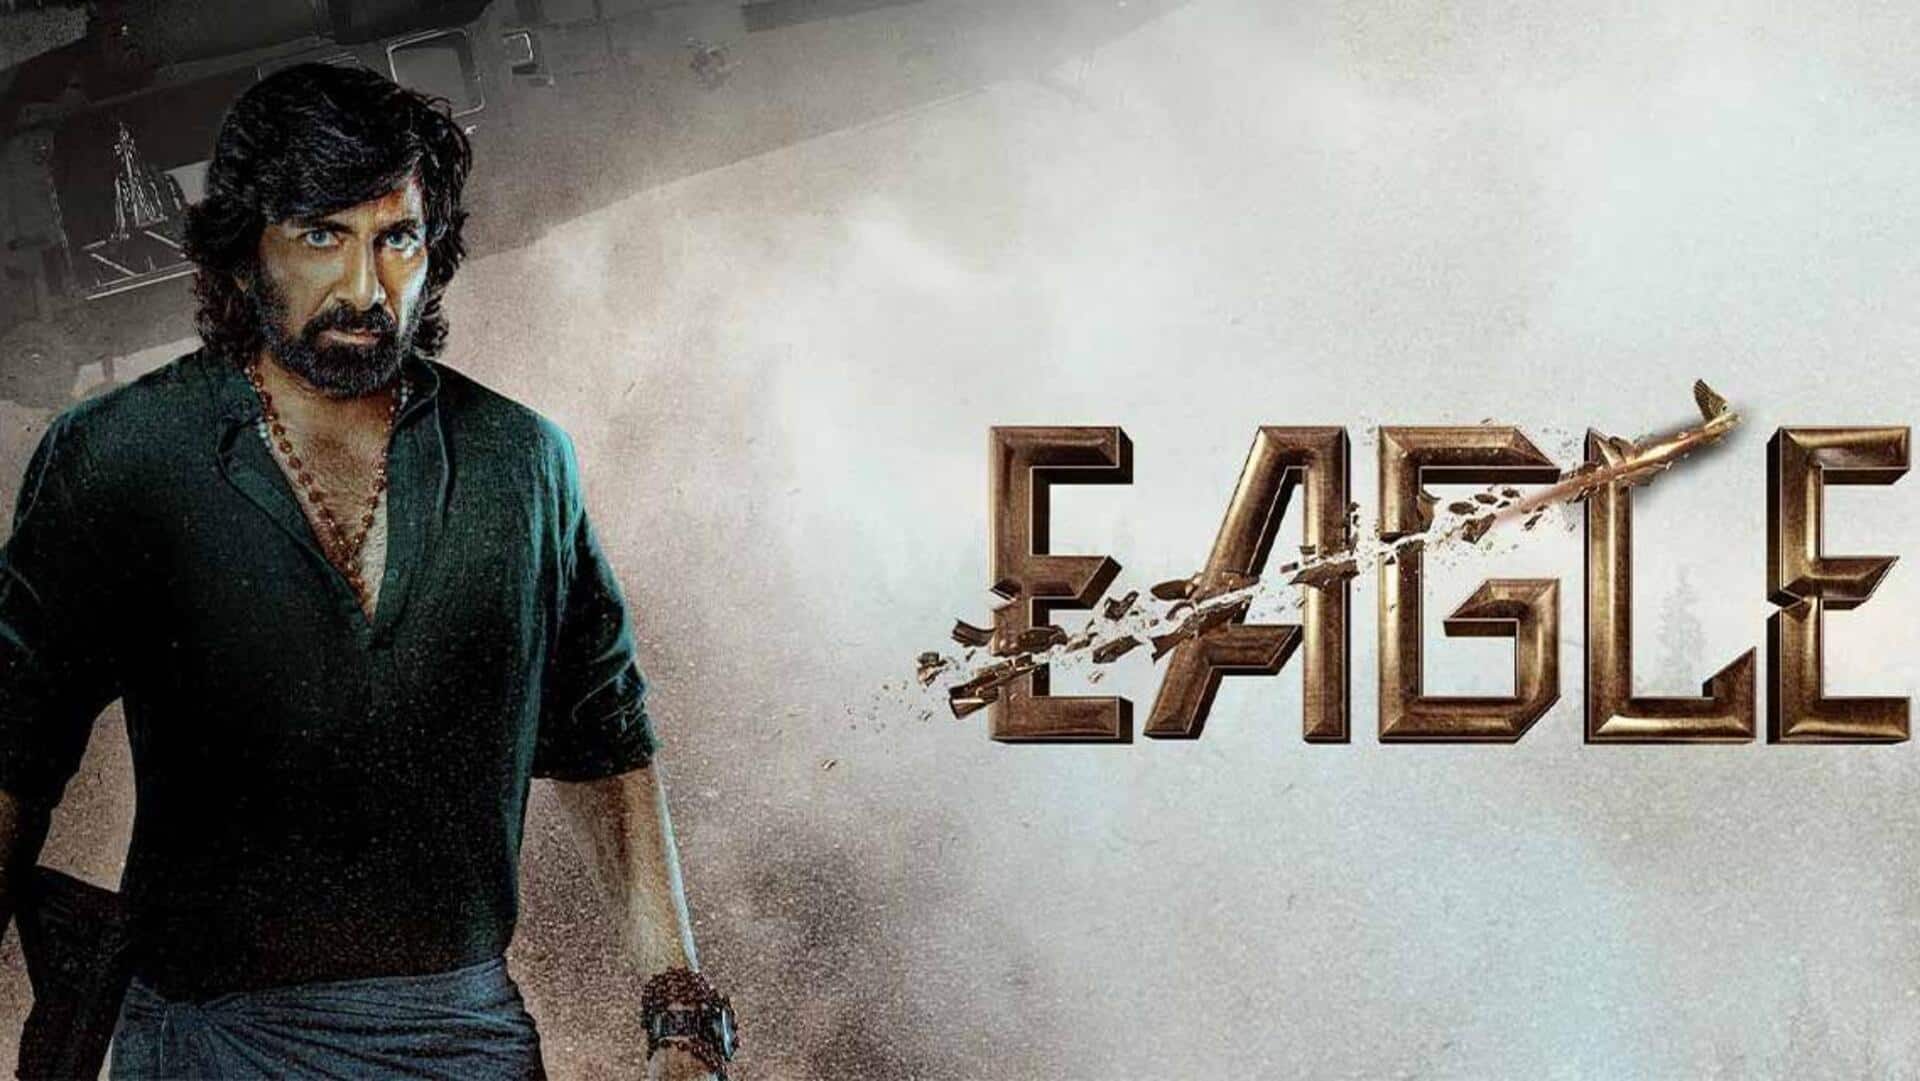 Box office collection: 'Eagle' keeps flying with stability